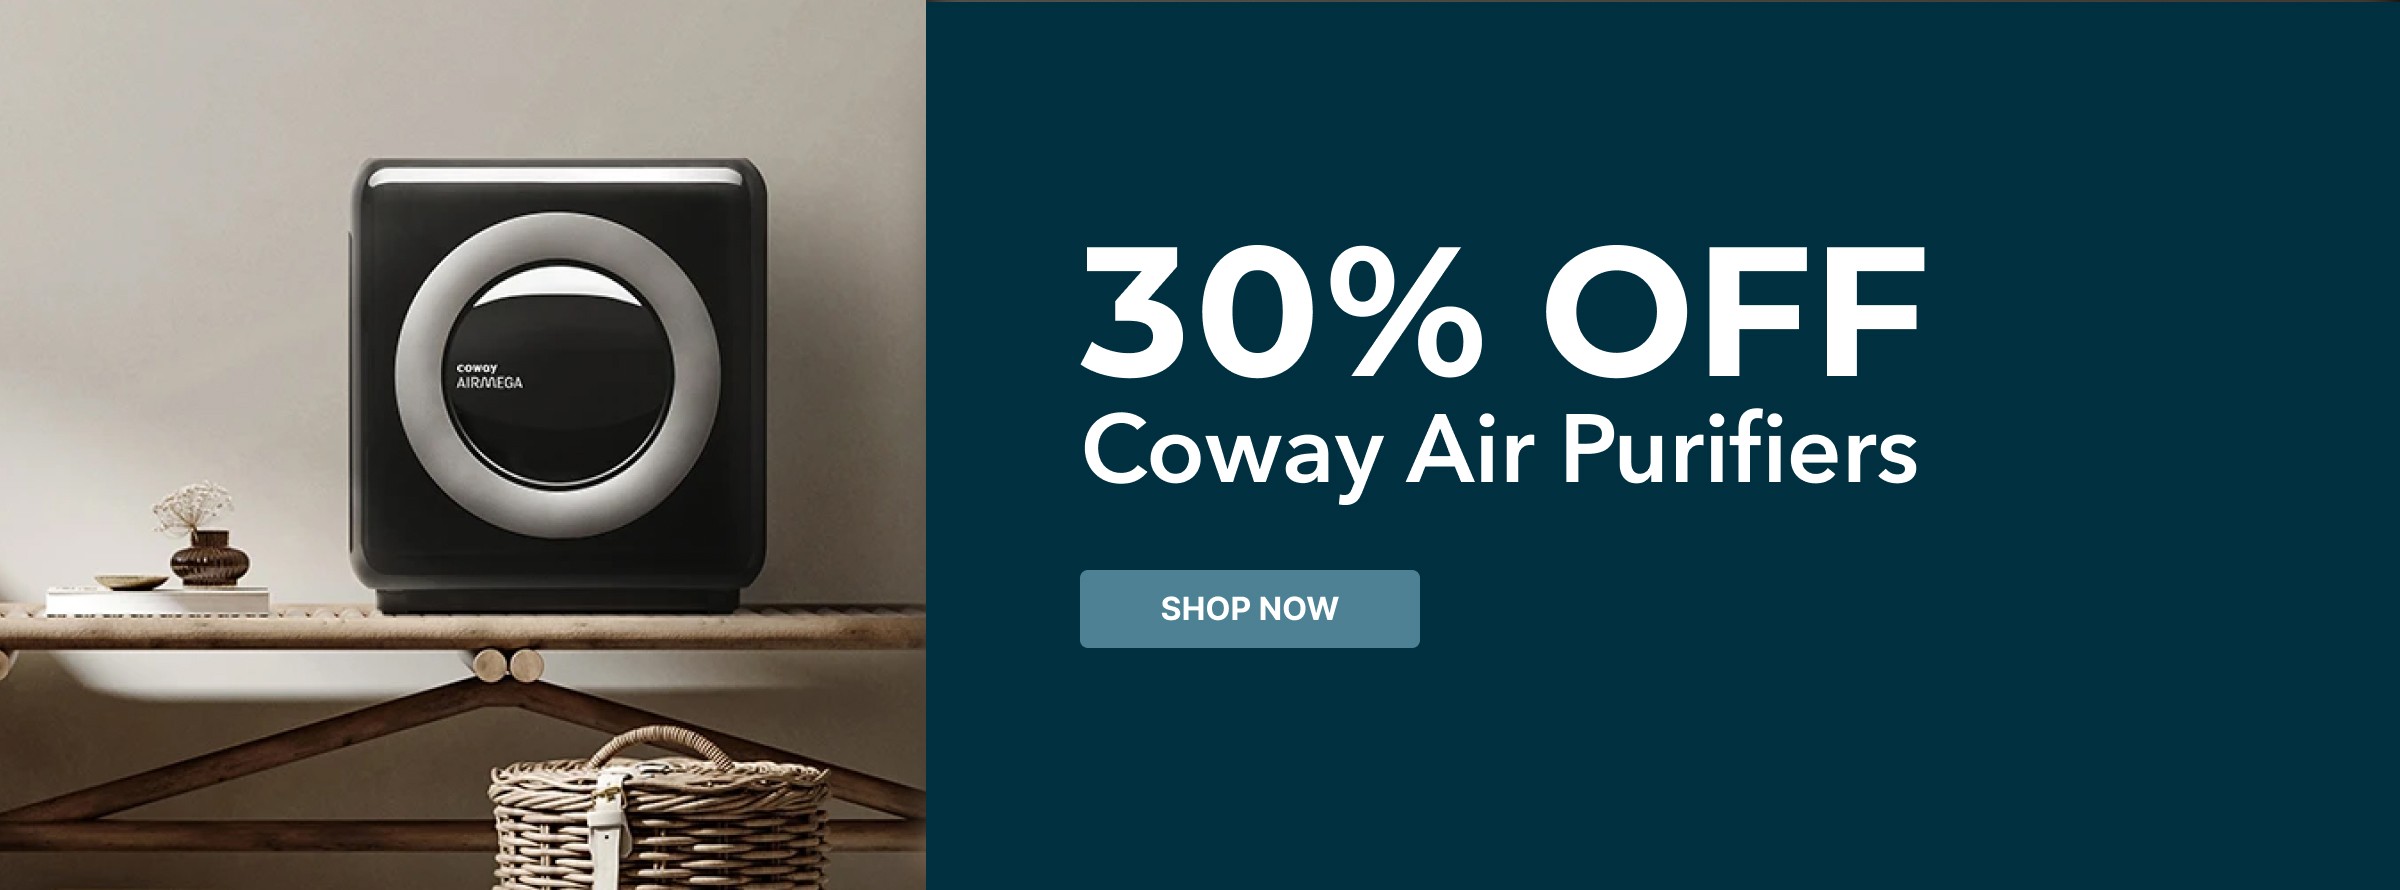 30% Off Coway Air Purifiers